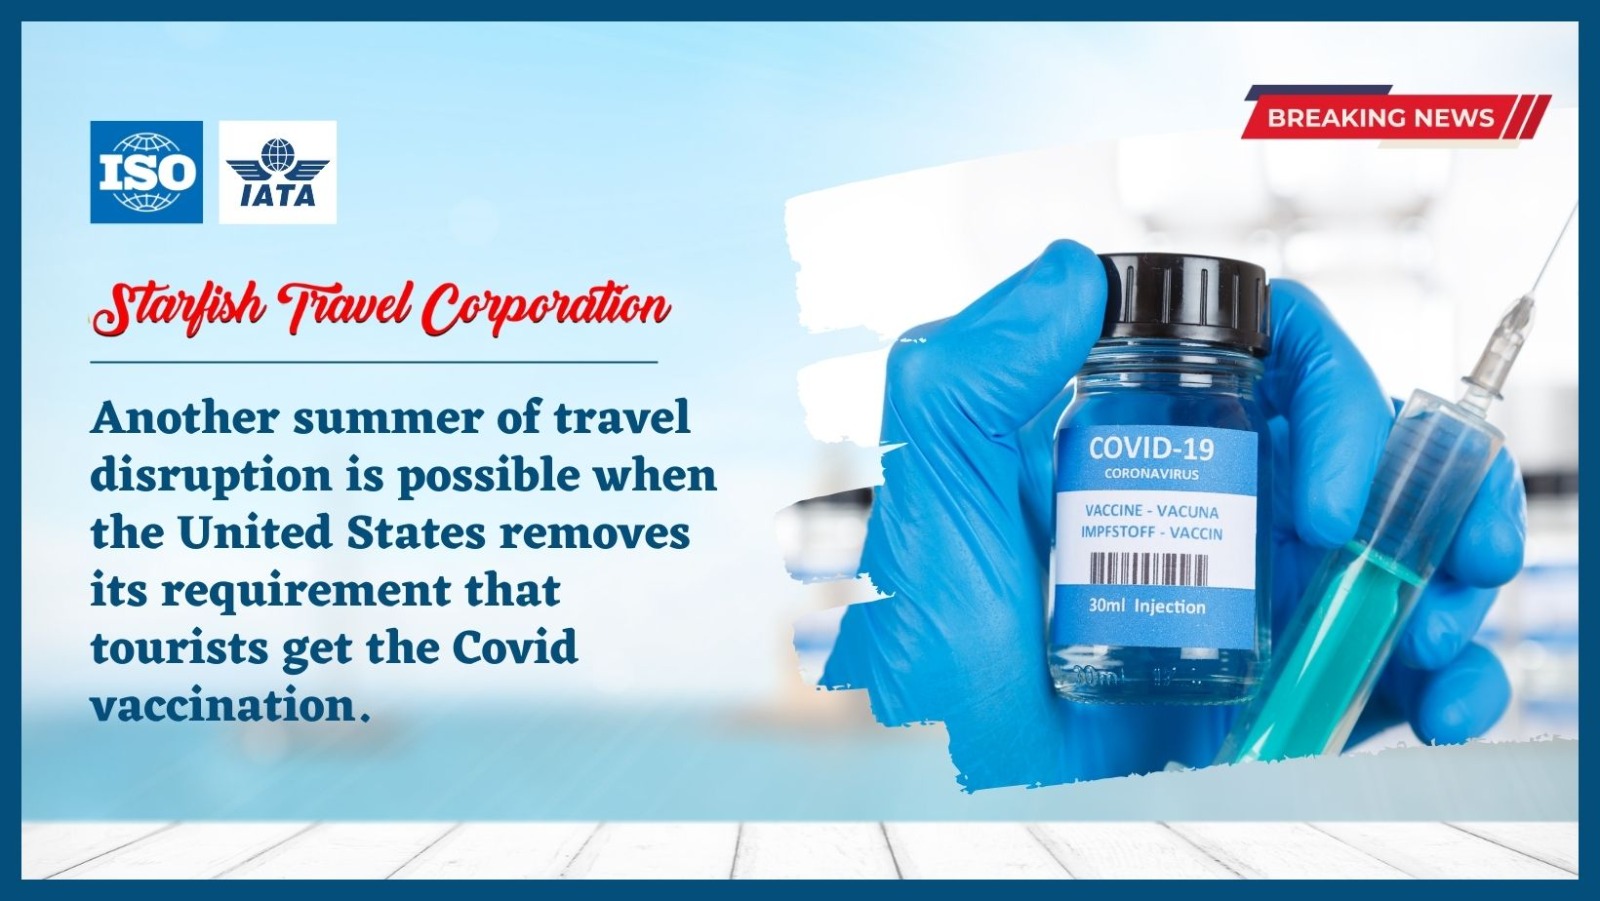 Another summer of travel disruption is possible when the United States removes its requirement that tourists get the Covid vaccination.